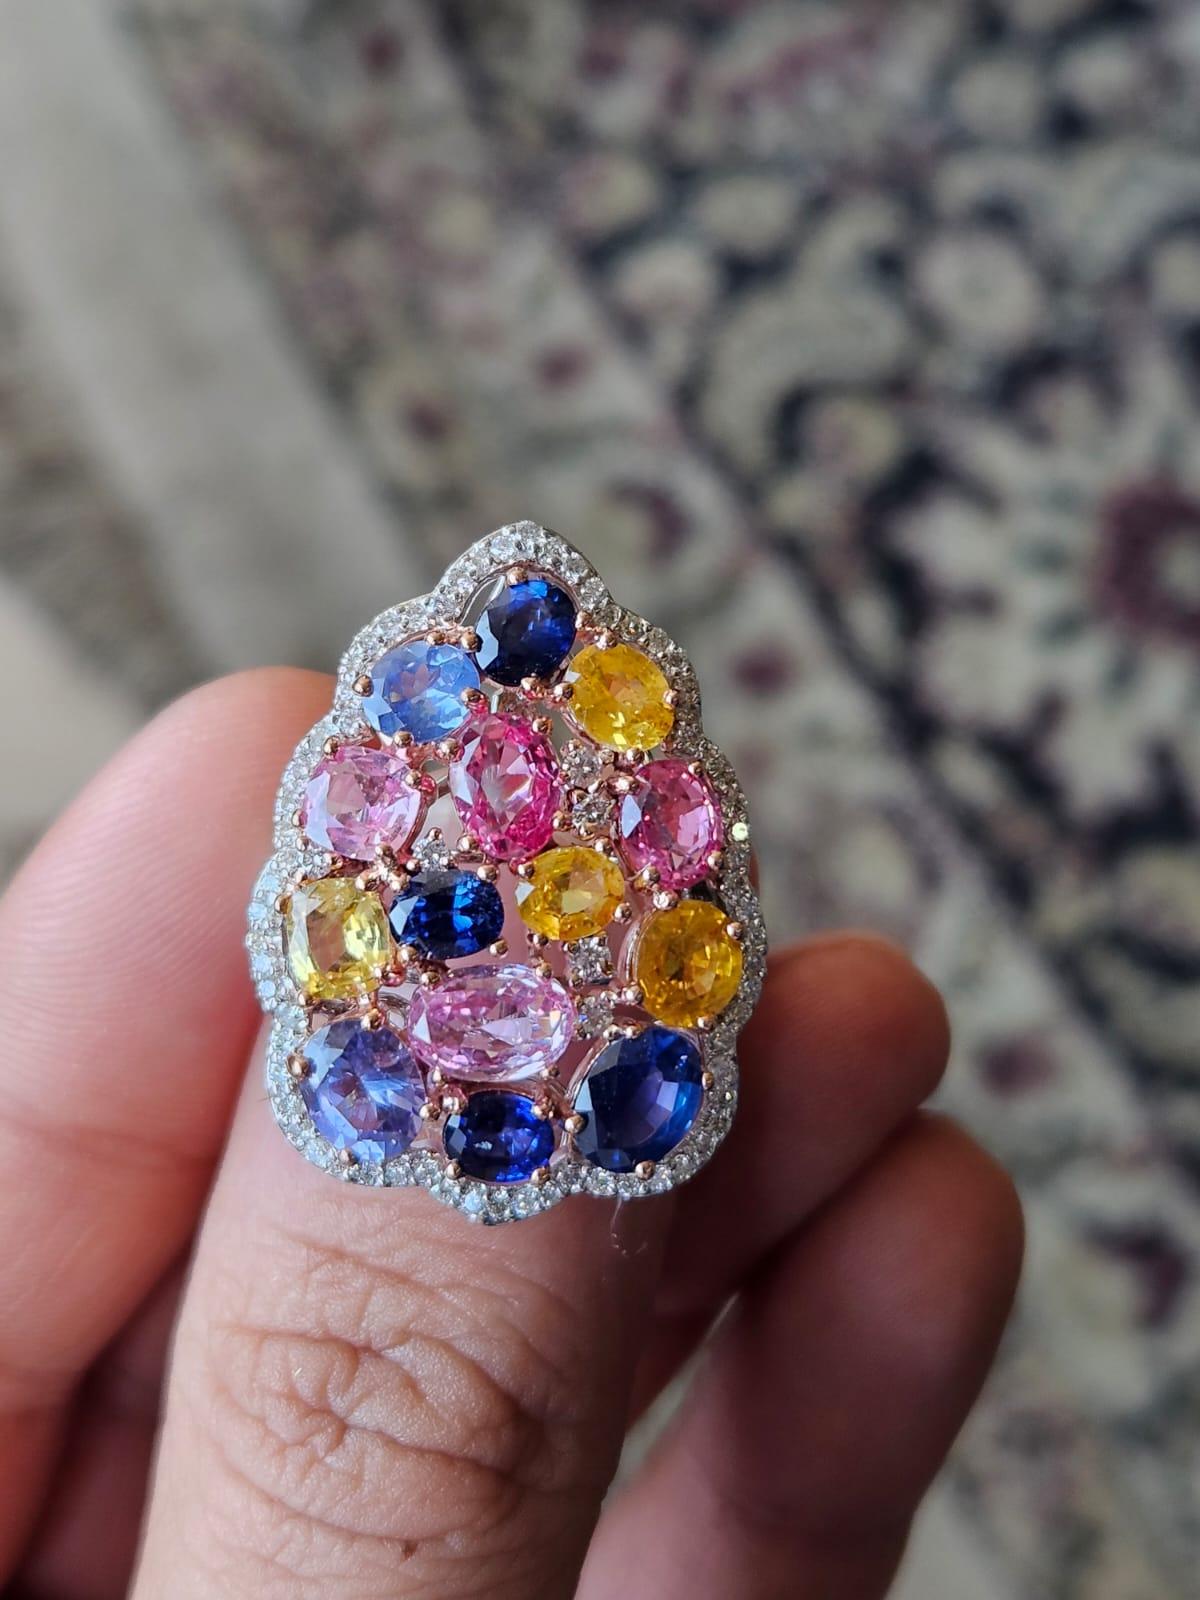 A very beautiful and chic, Multi Sapphires Cocktail Ring set in 18K White Gold & Diamonds. The weight of the Multi Sapphires is 7.90 carats. The Multi Sapphires are of Ceylon (Sri Lanka) origin. The Diamonds weight is 0.82 carats. Net 18K Gold